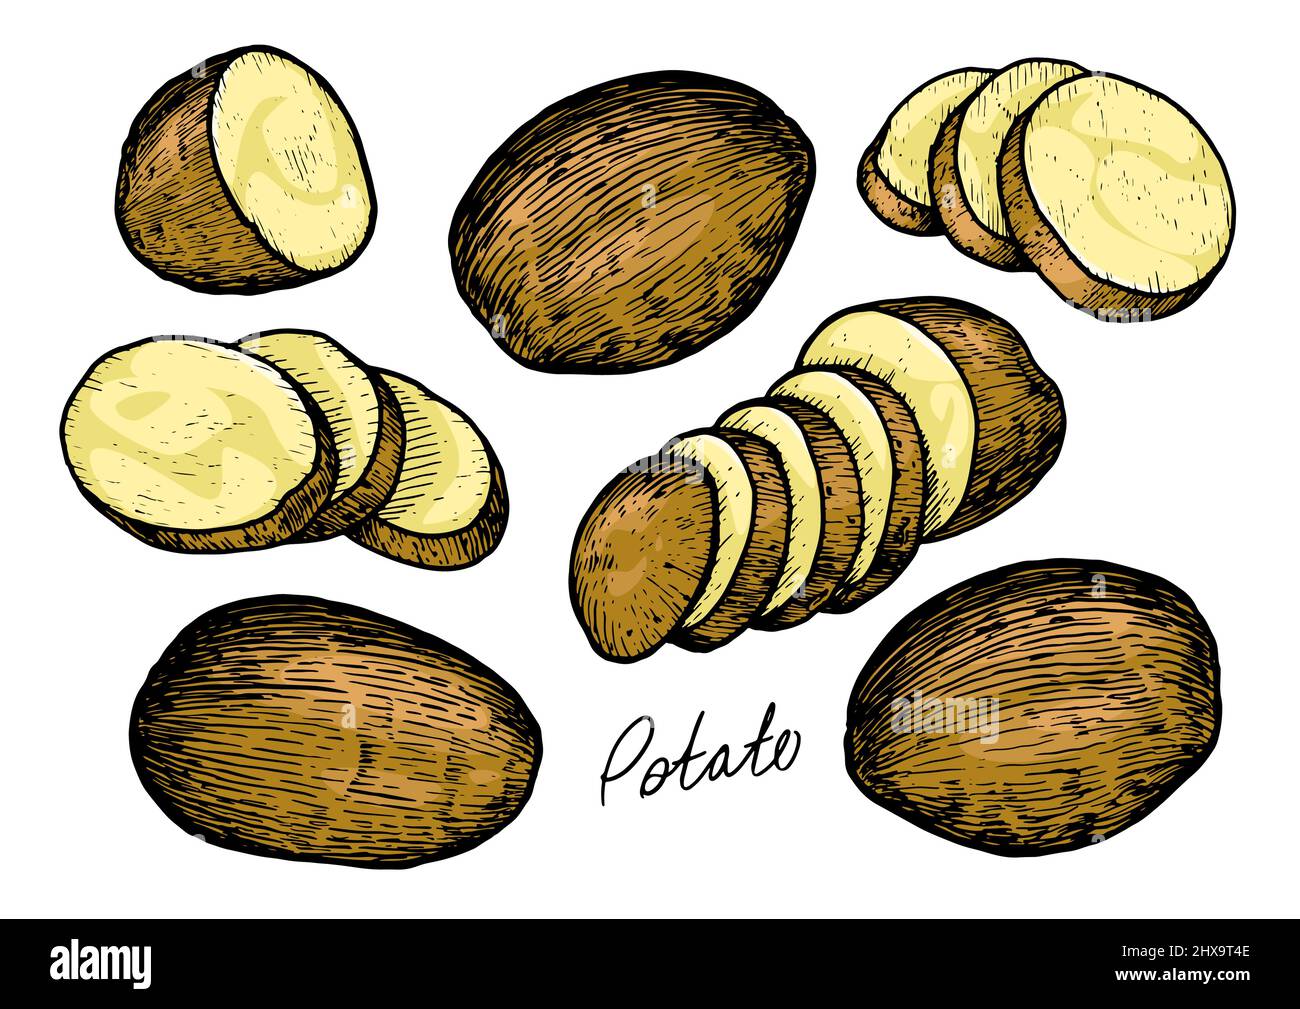 Raw potatoes set with whole root crops and sliced pieces. Farm vegetables vector illustration Stock Vector